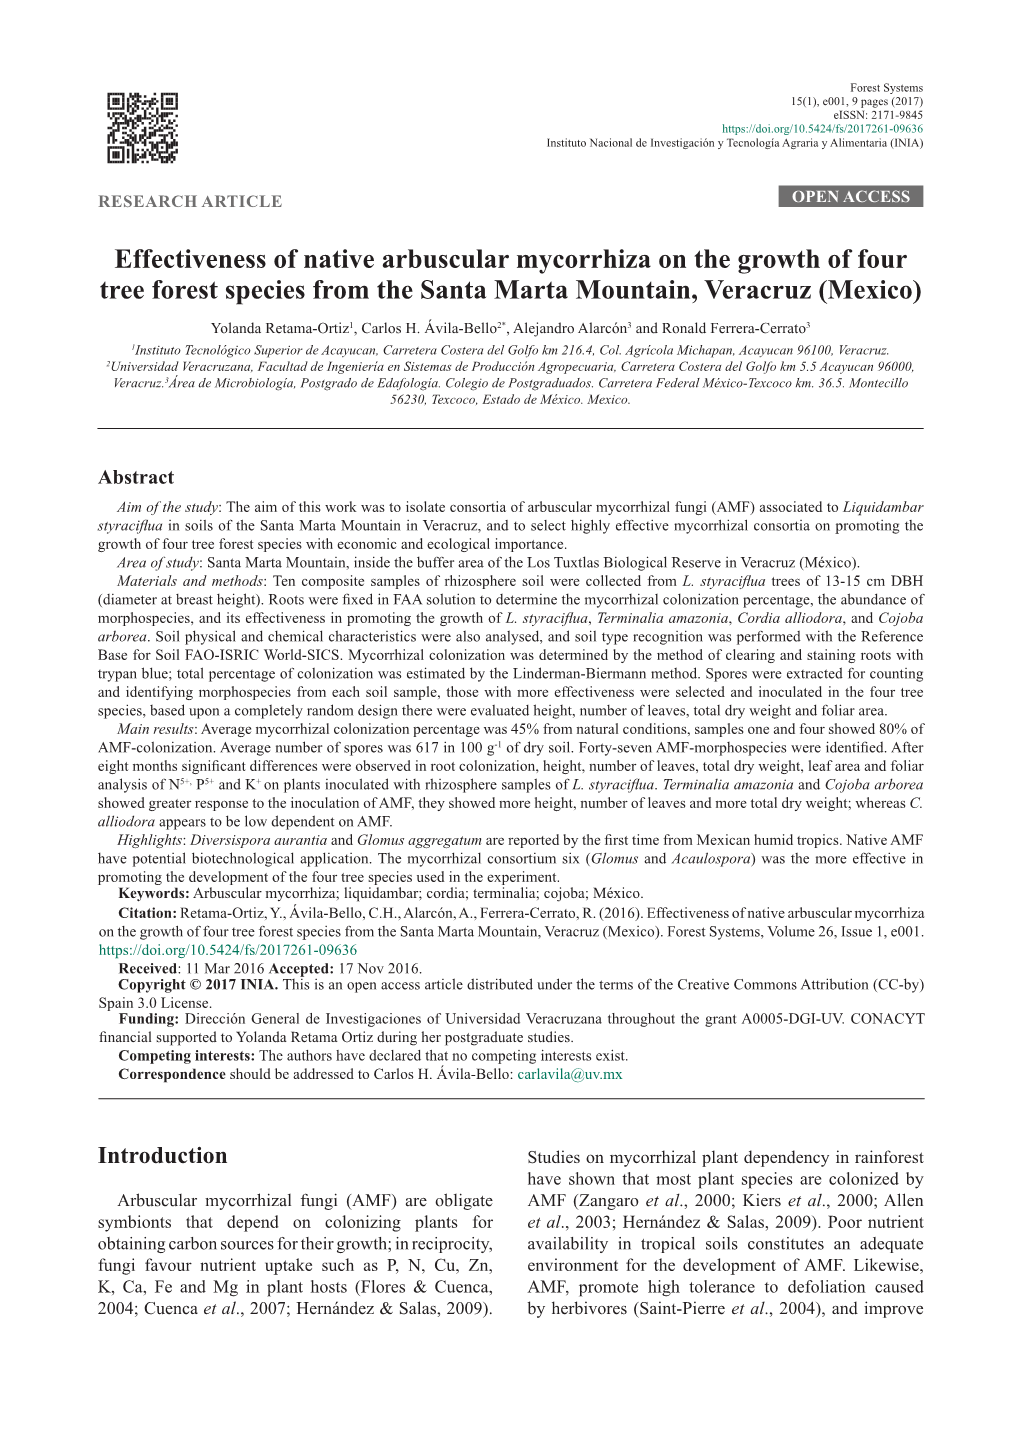 Effectiveness of Native Arbuscular Mycorrhiza on the Growth of Four